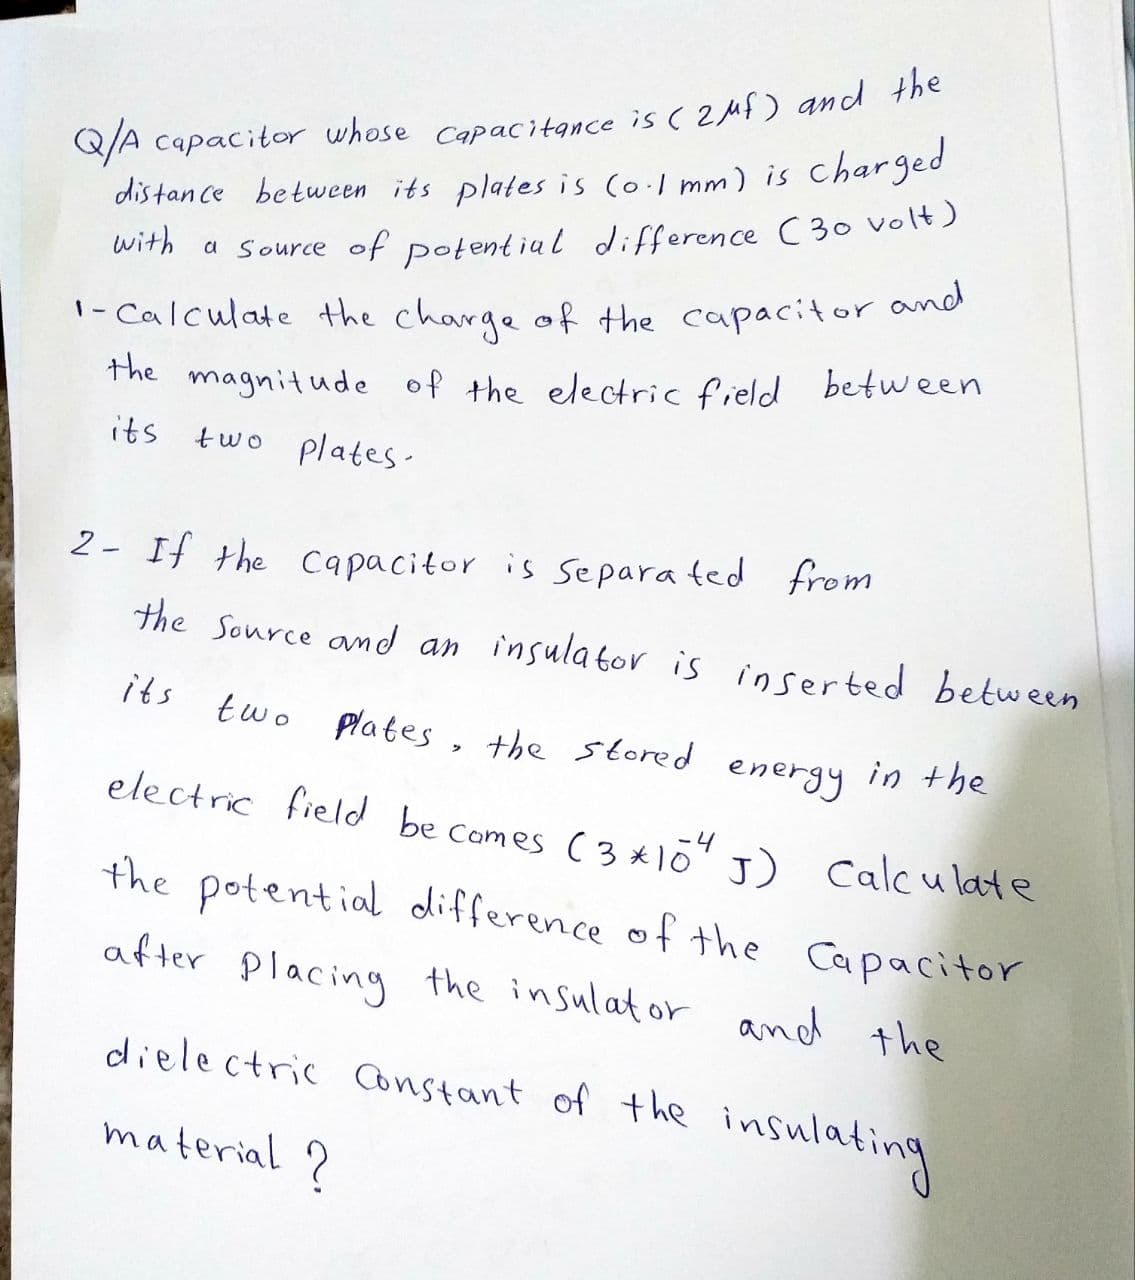 Q/A capacitor whose Capacitance is ( 2uf) and the
distan ce between its plates is (o.1 mm) is
charged
0ITh a Source of potent ial difference C30 volt)
1- Calculate the charge of the capacitor and
the
magnitude of the electric field between
its two plates.
2- If the capacitor is separa ted from
the Source amd an insulator is inserted between
its
two plates , the stored energy in the
electric field be Comes ( 3*10 ) Calc u late
-4
the potential difference of the Capacitor
after placing the insulator and the
dielectric Constant of the insulating
material ?
